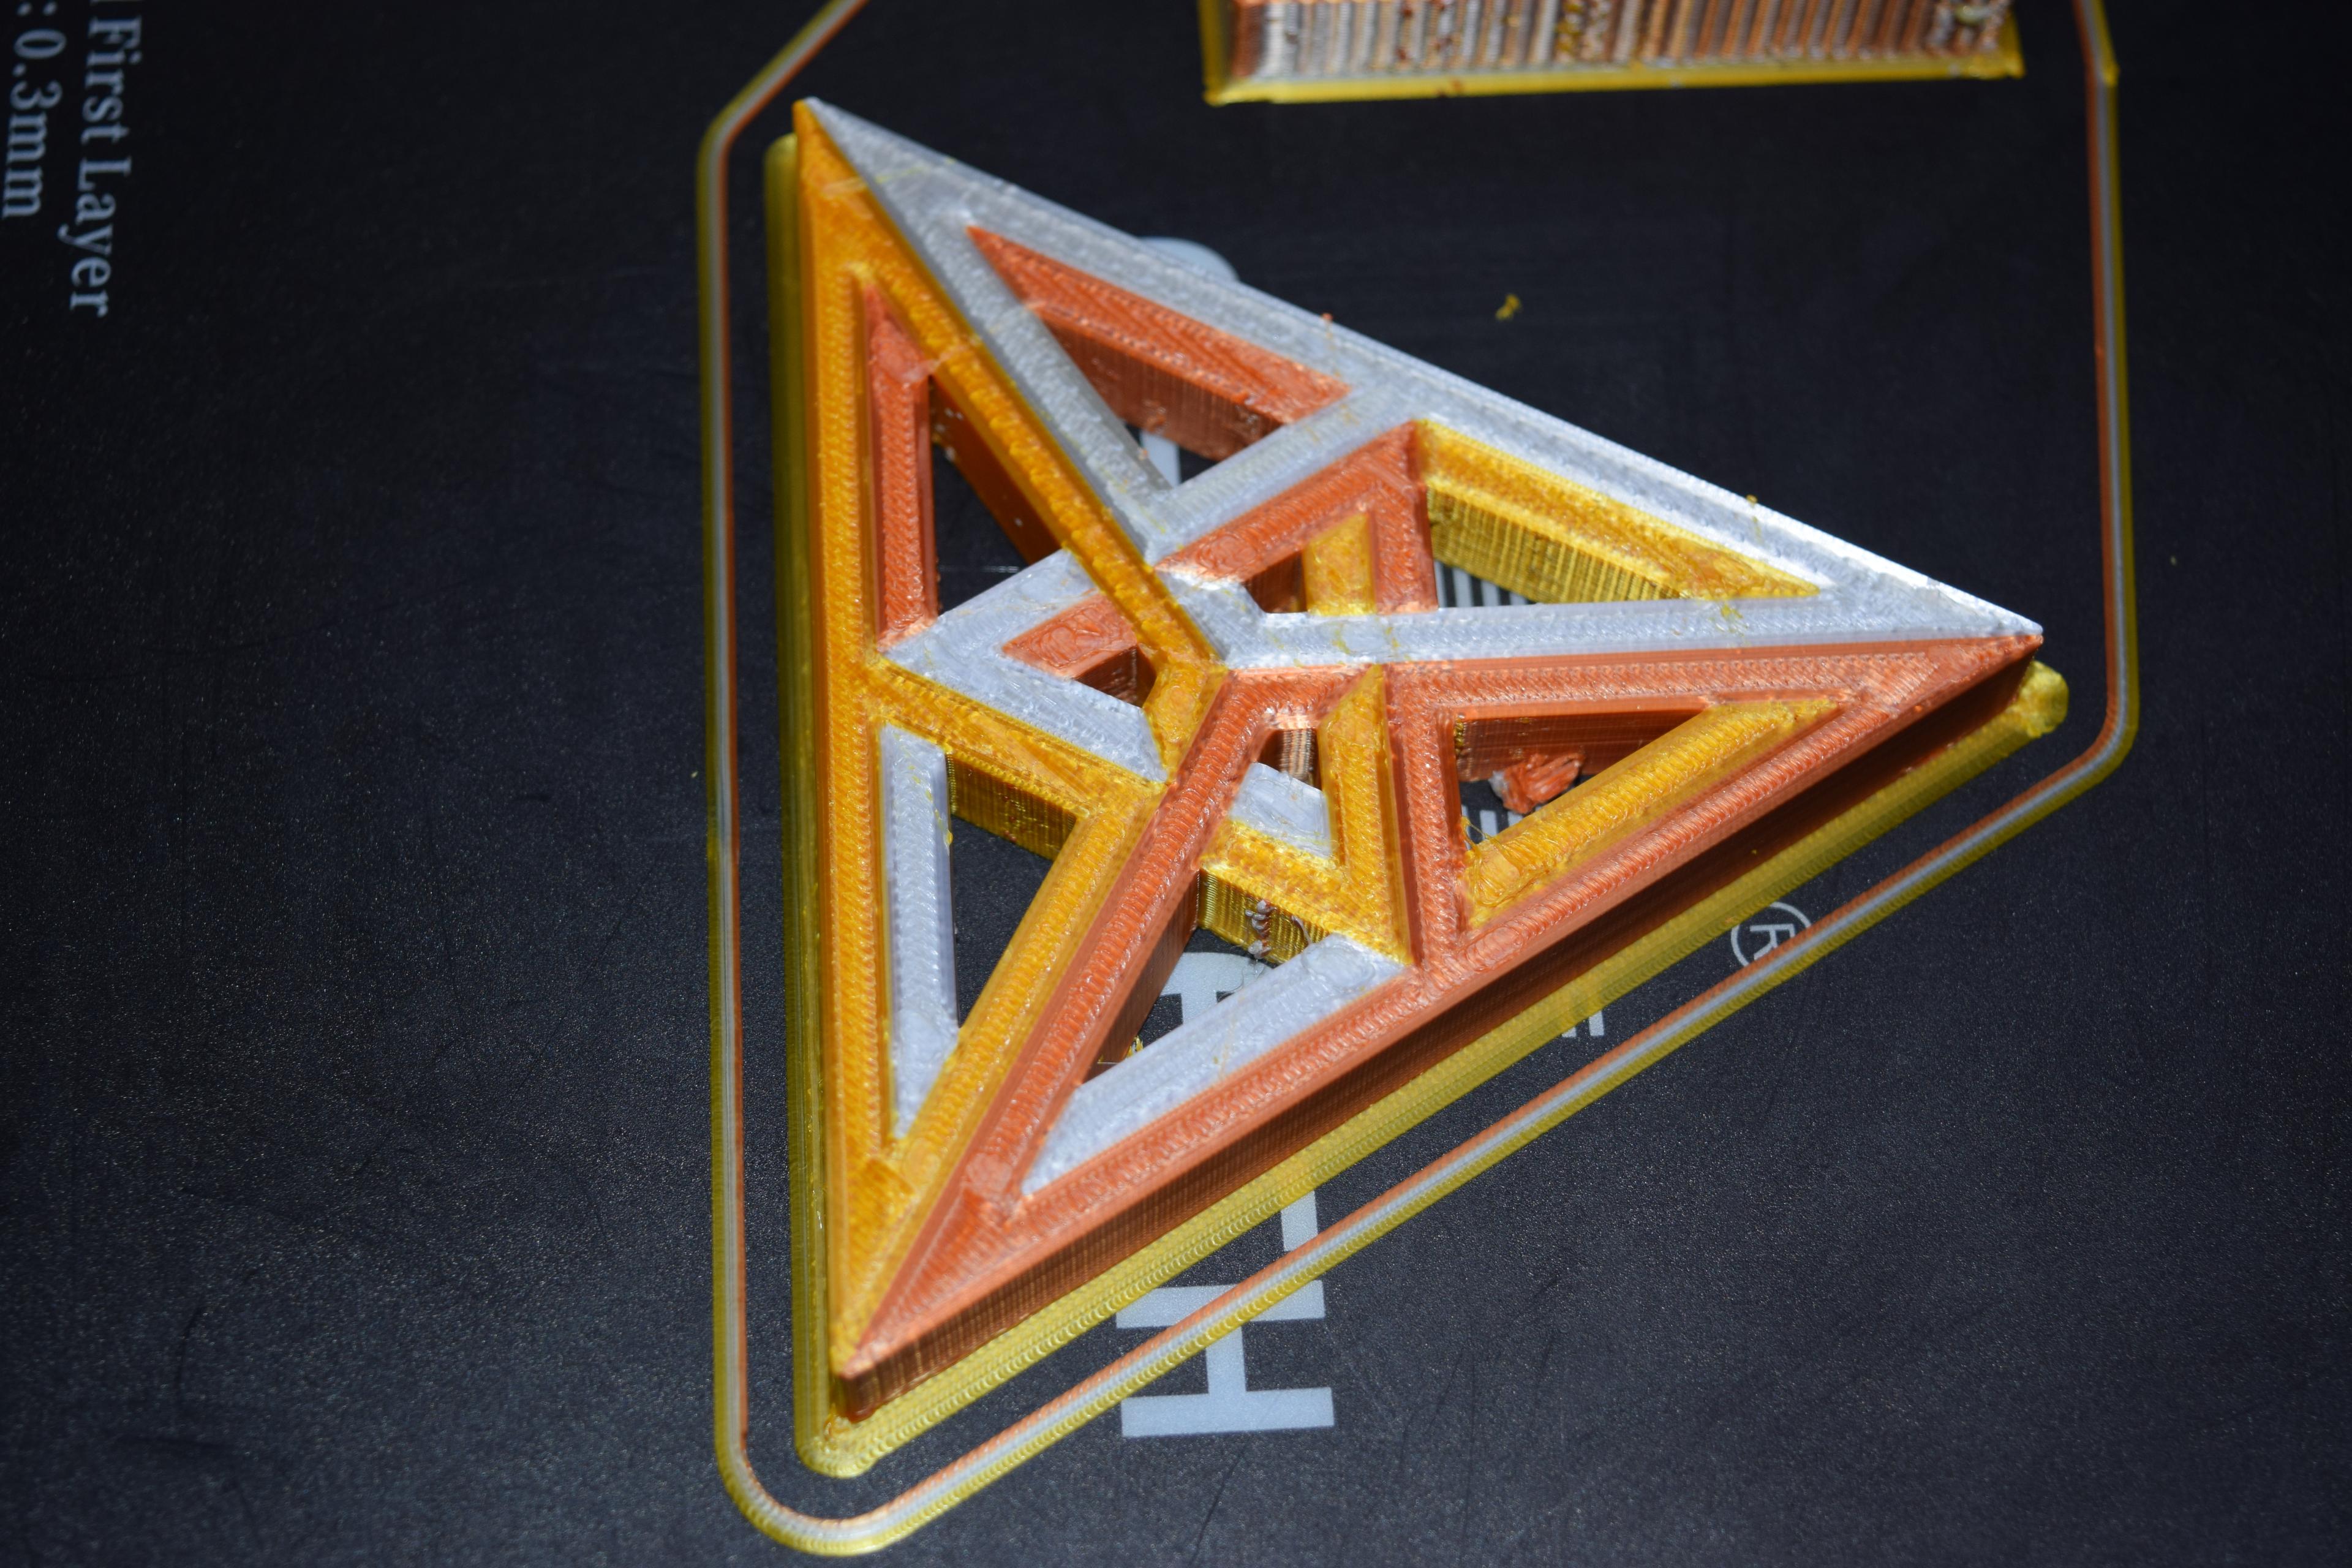 Has the Impossible Triangle Been Made Possible with 3D Printing? 